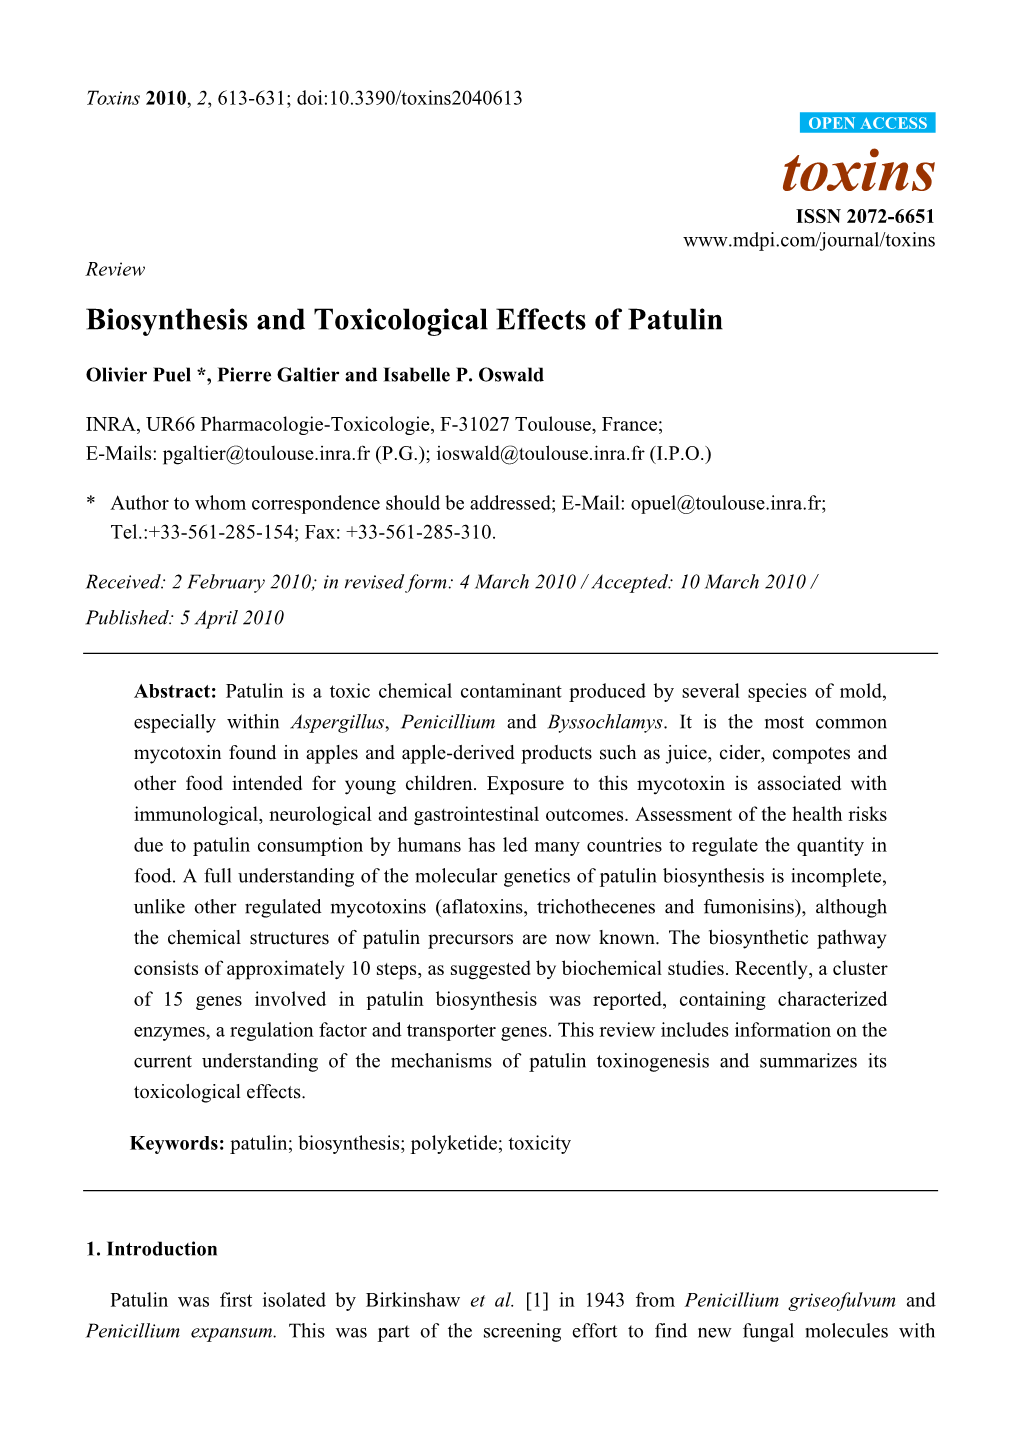 Biosynthesis and Toxicological Effects of Patulin